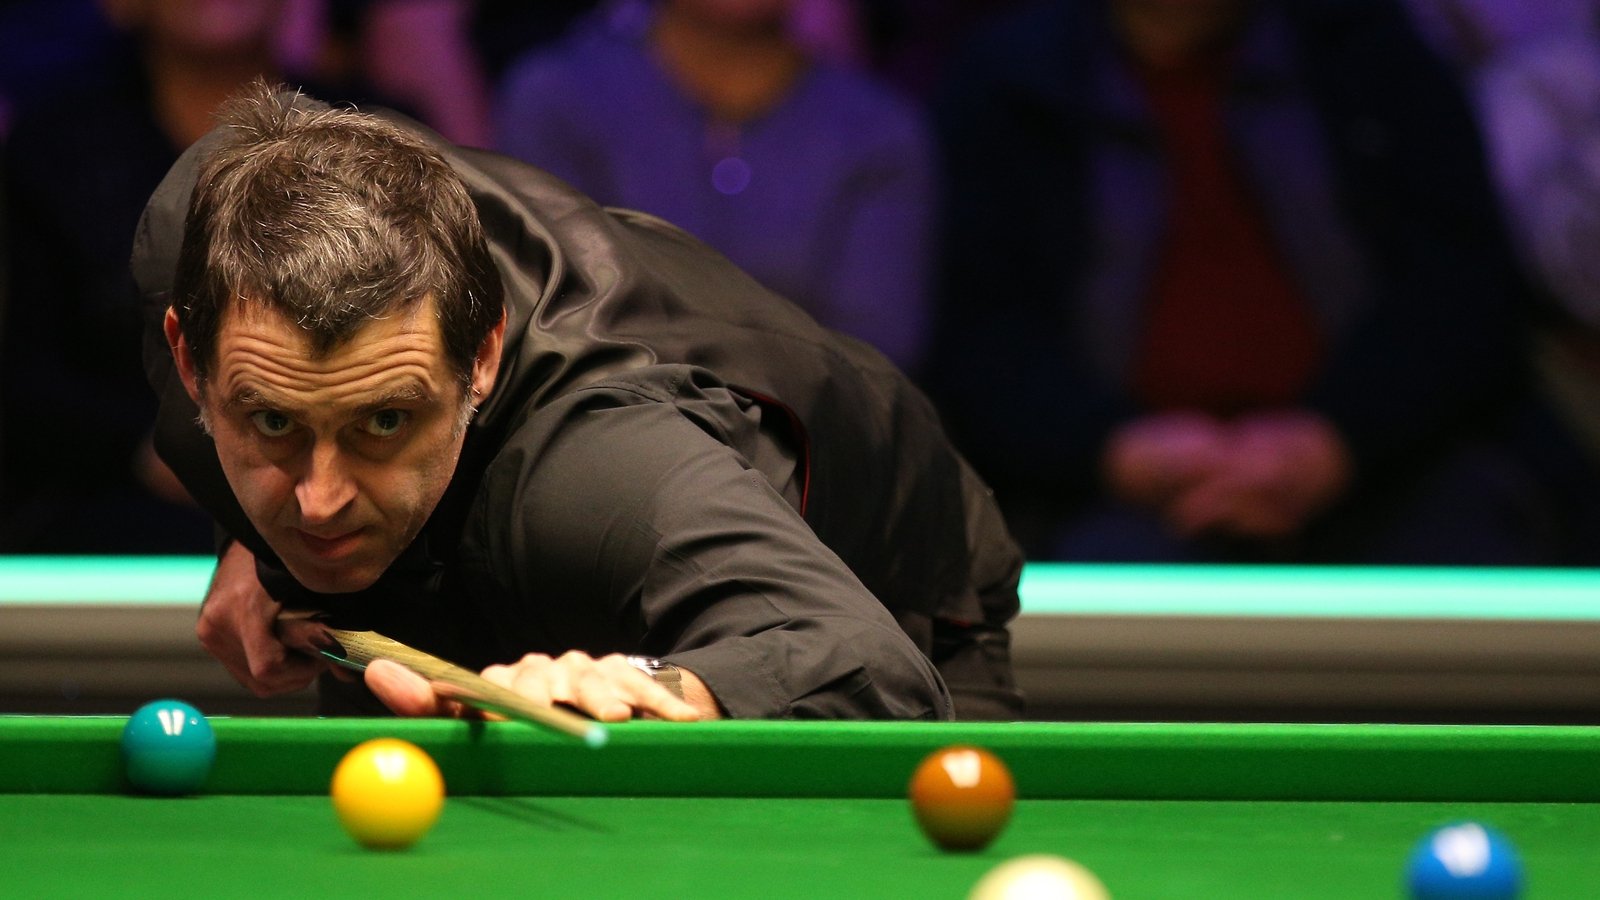 Ronnie OSullivan reaches another final after comeback